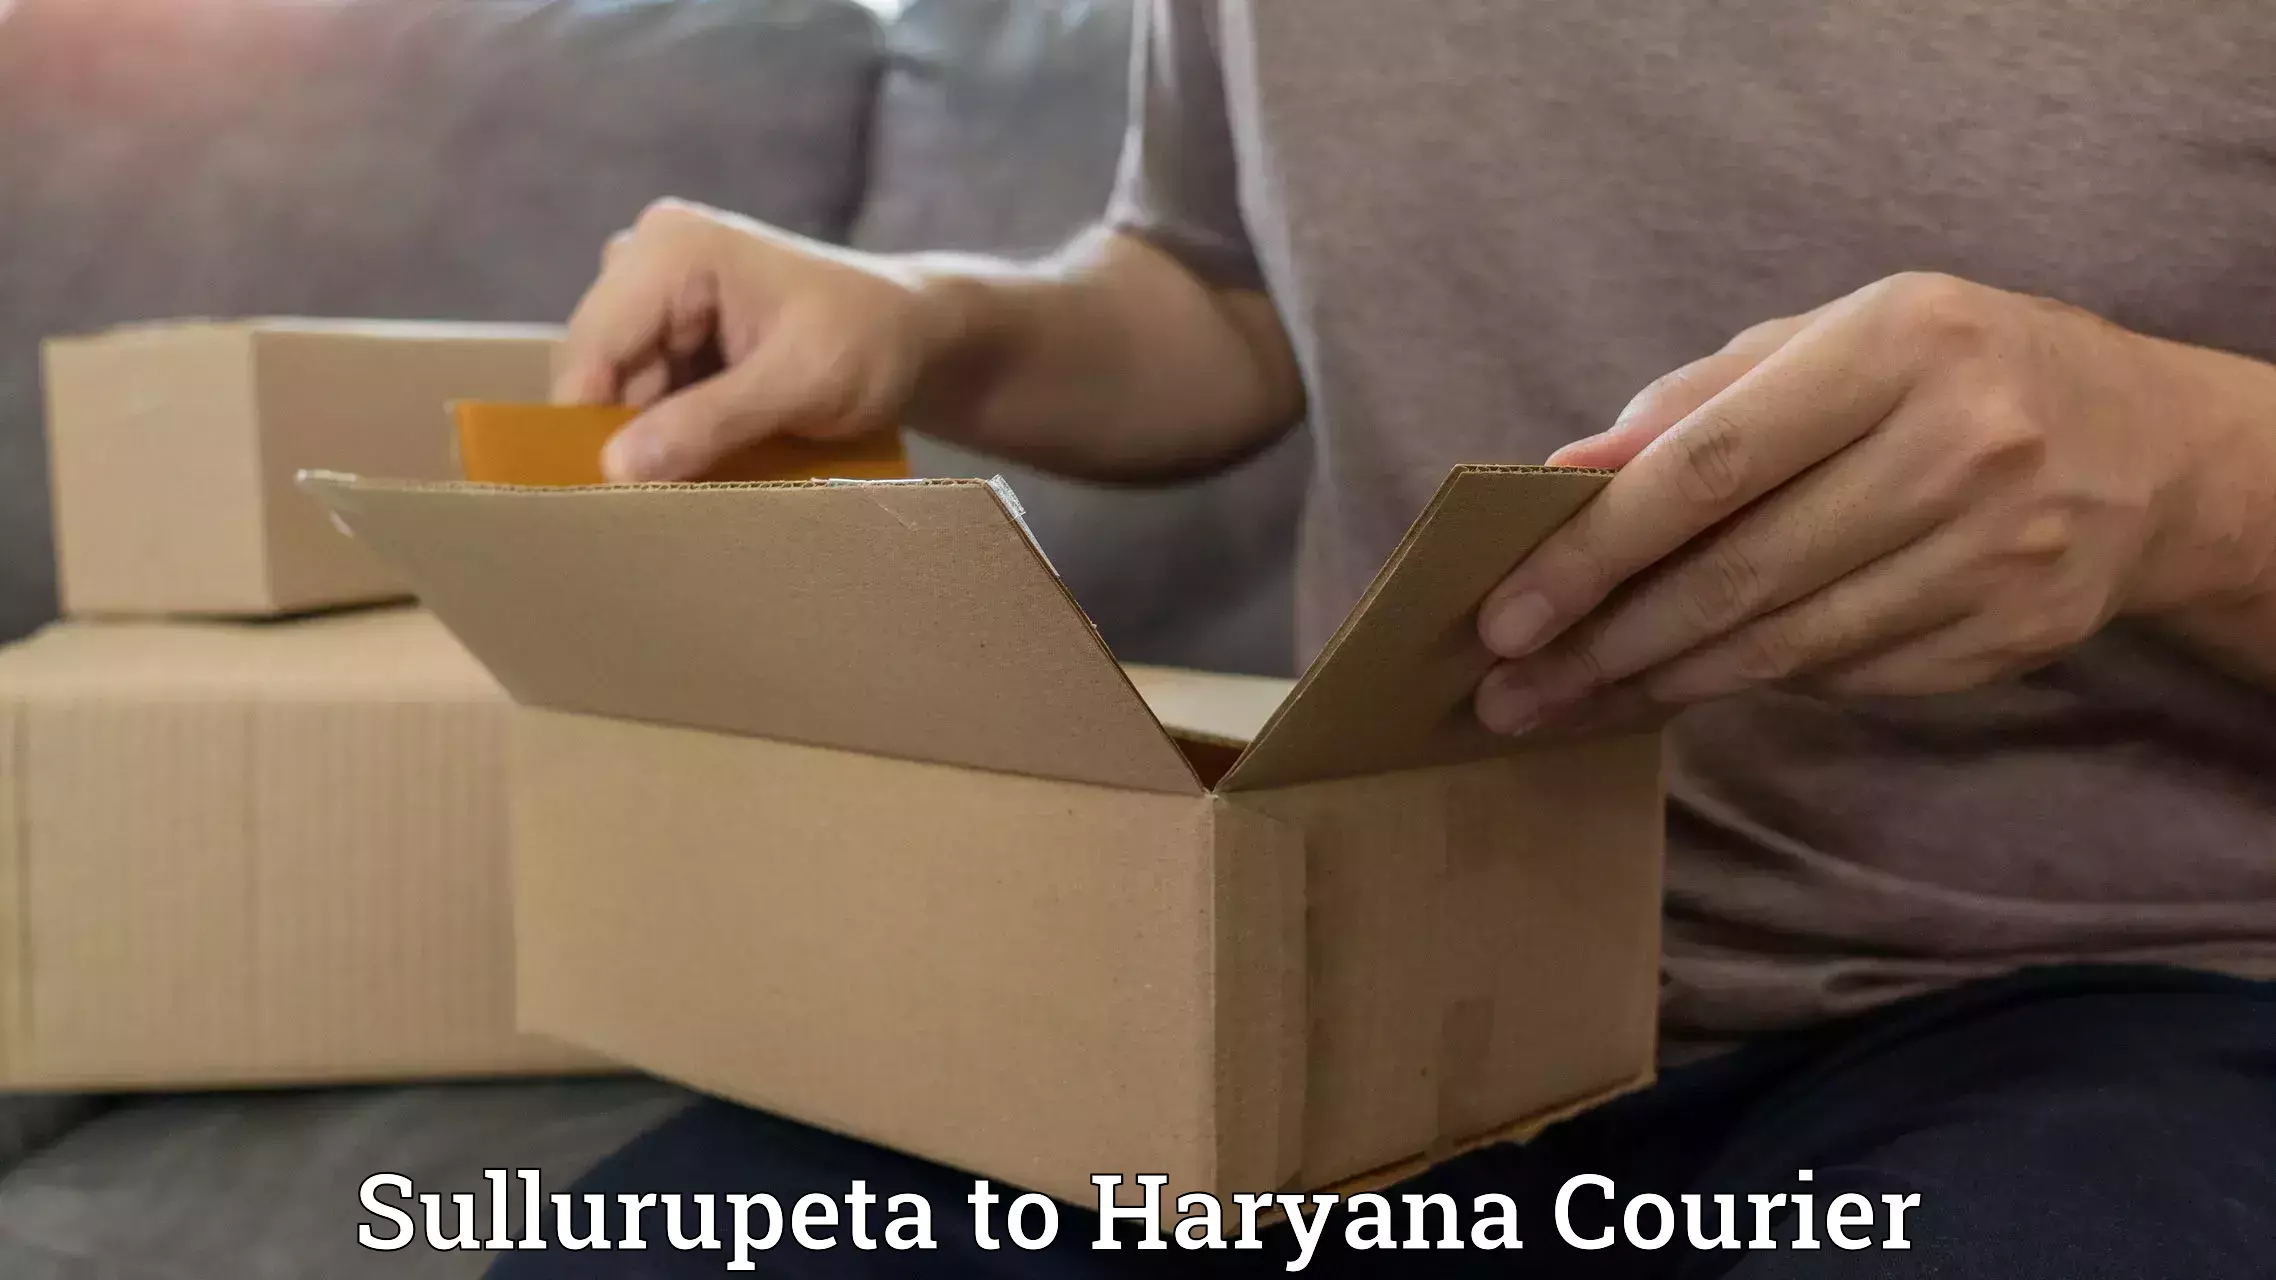 State-of-the-art courier technology Sullurupeta to NCR Haryana